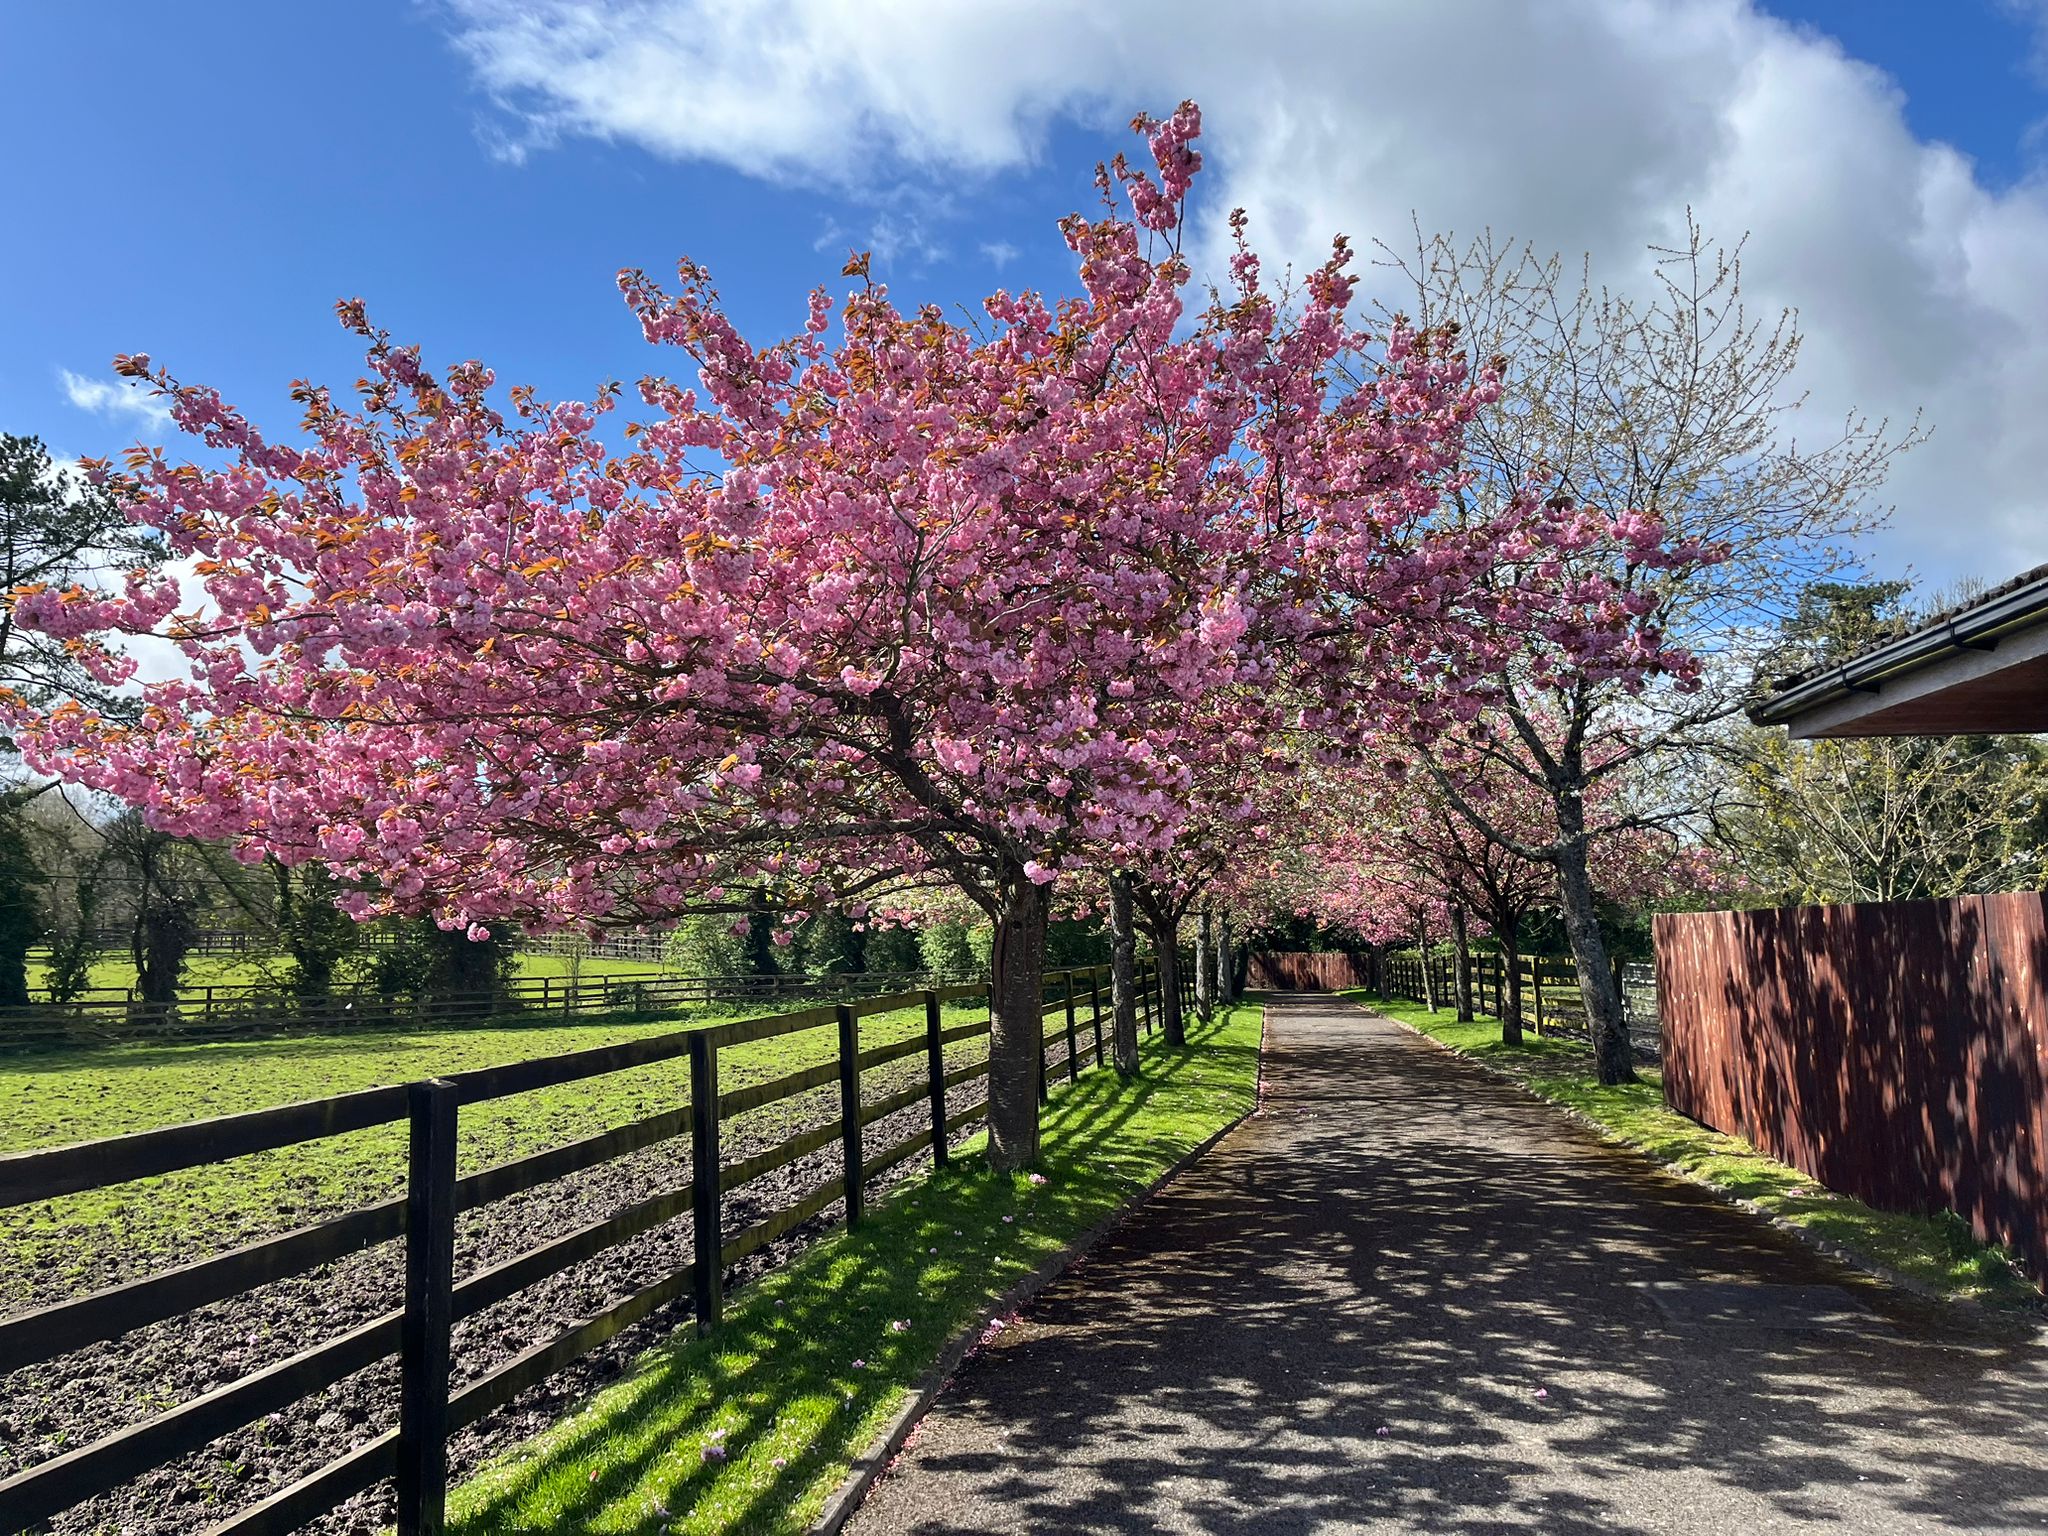 Spring Updates at the Irish National Stud: Cherry Blossoms, Foals, and Ducklings